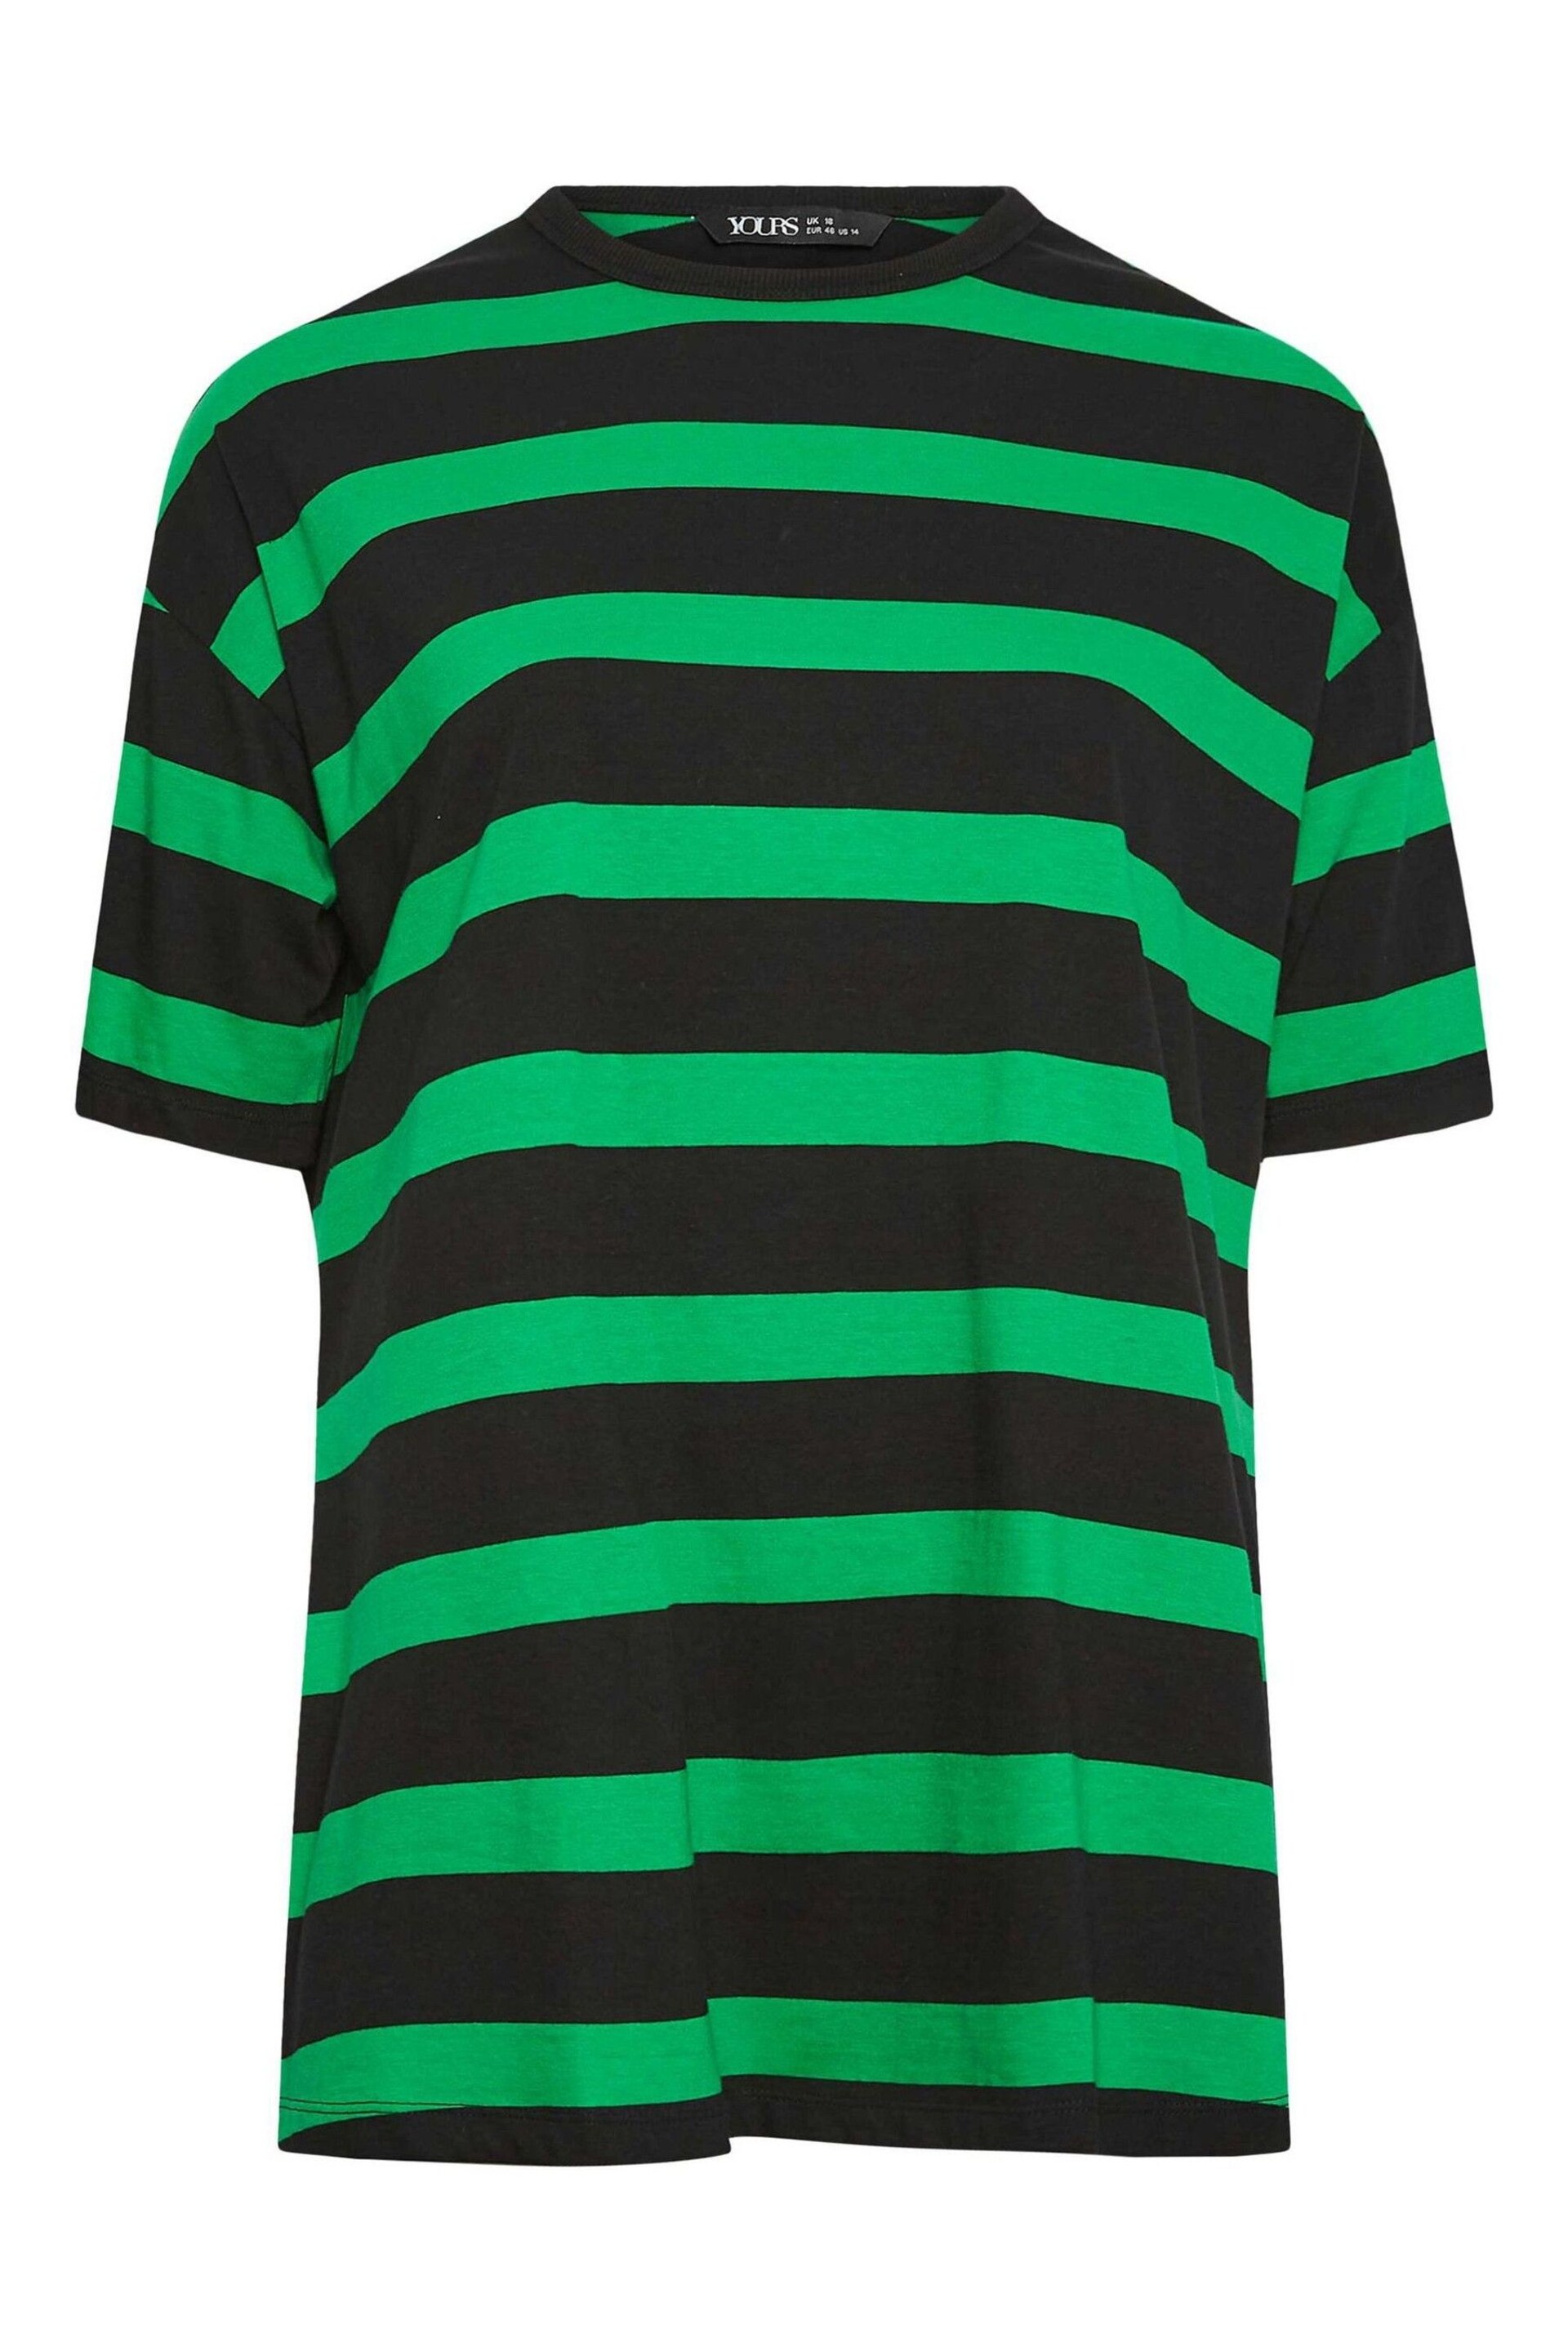 Yours Curve Green Oversized T-Shirt With Jumbo Stripe - Image 5 of 5